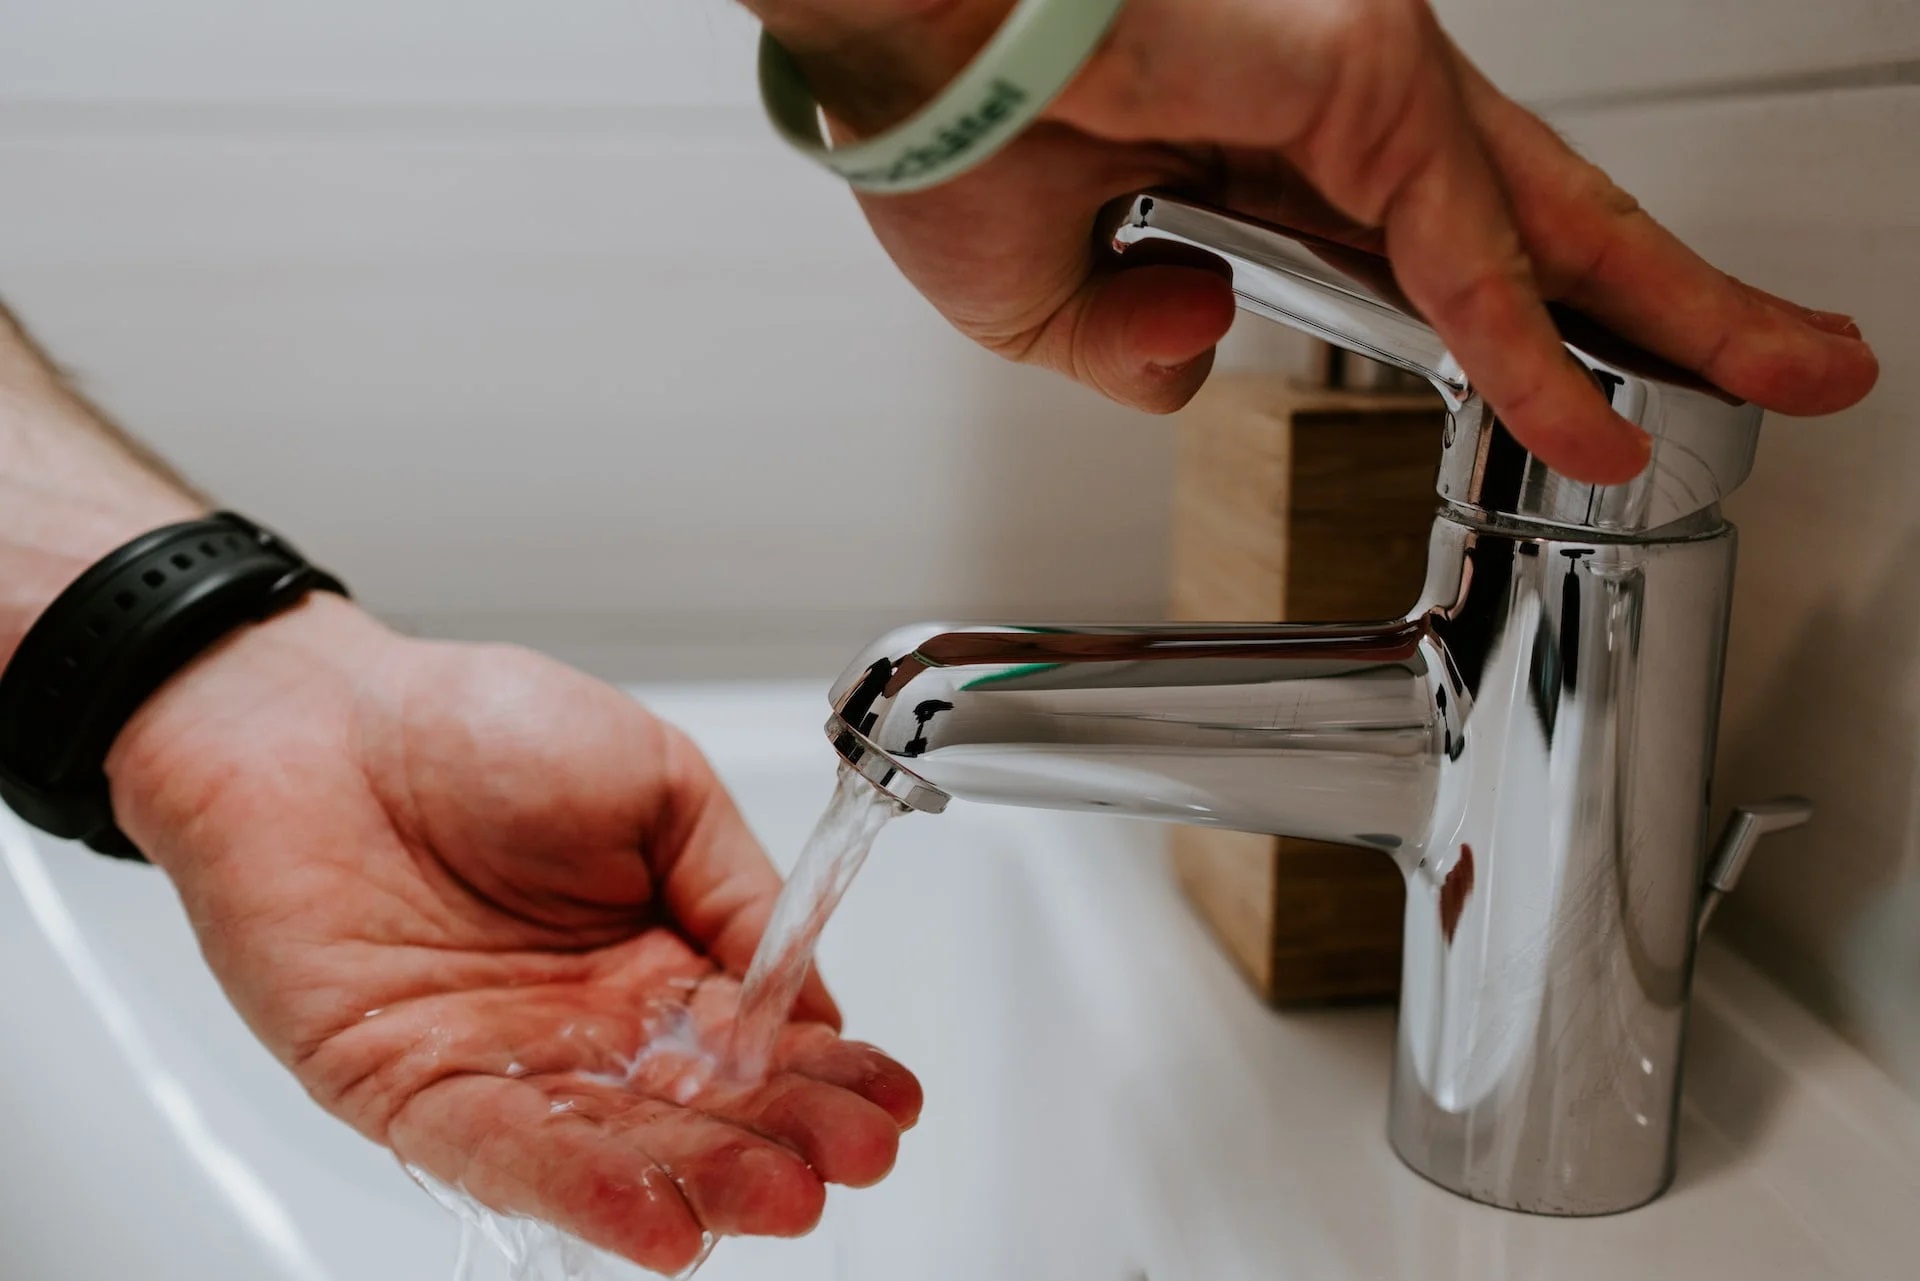 How To Save Money By Cutting Your Water Usage This Summer